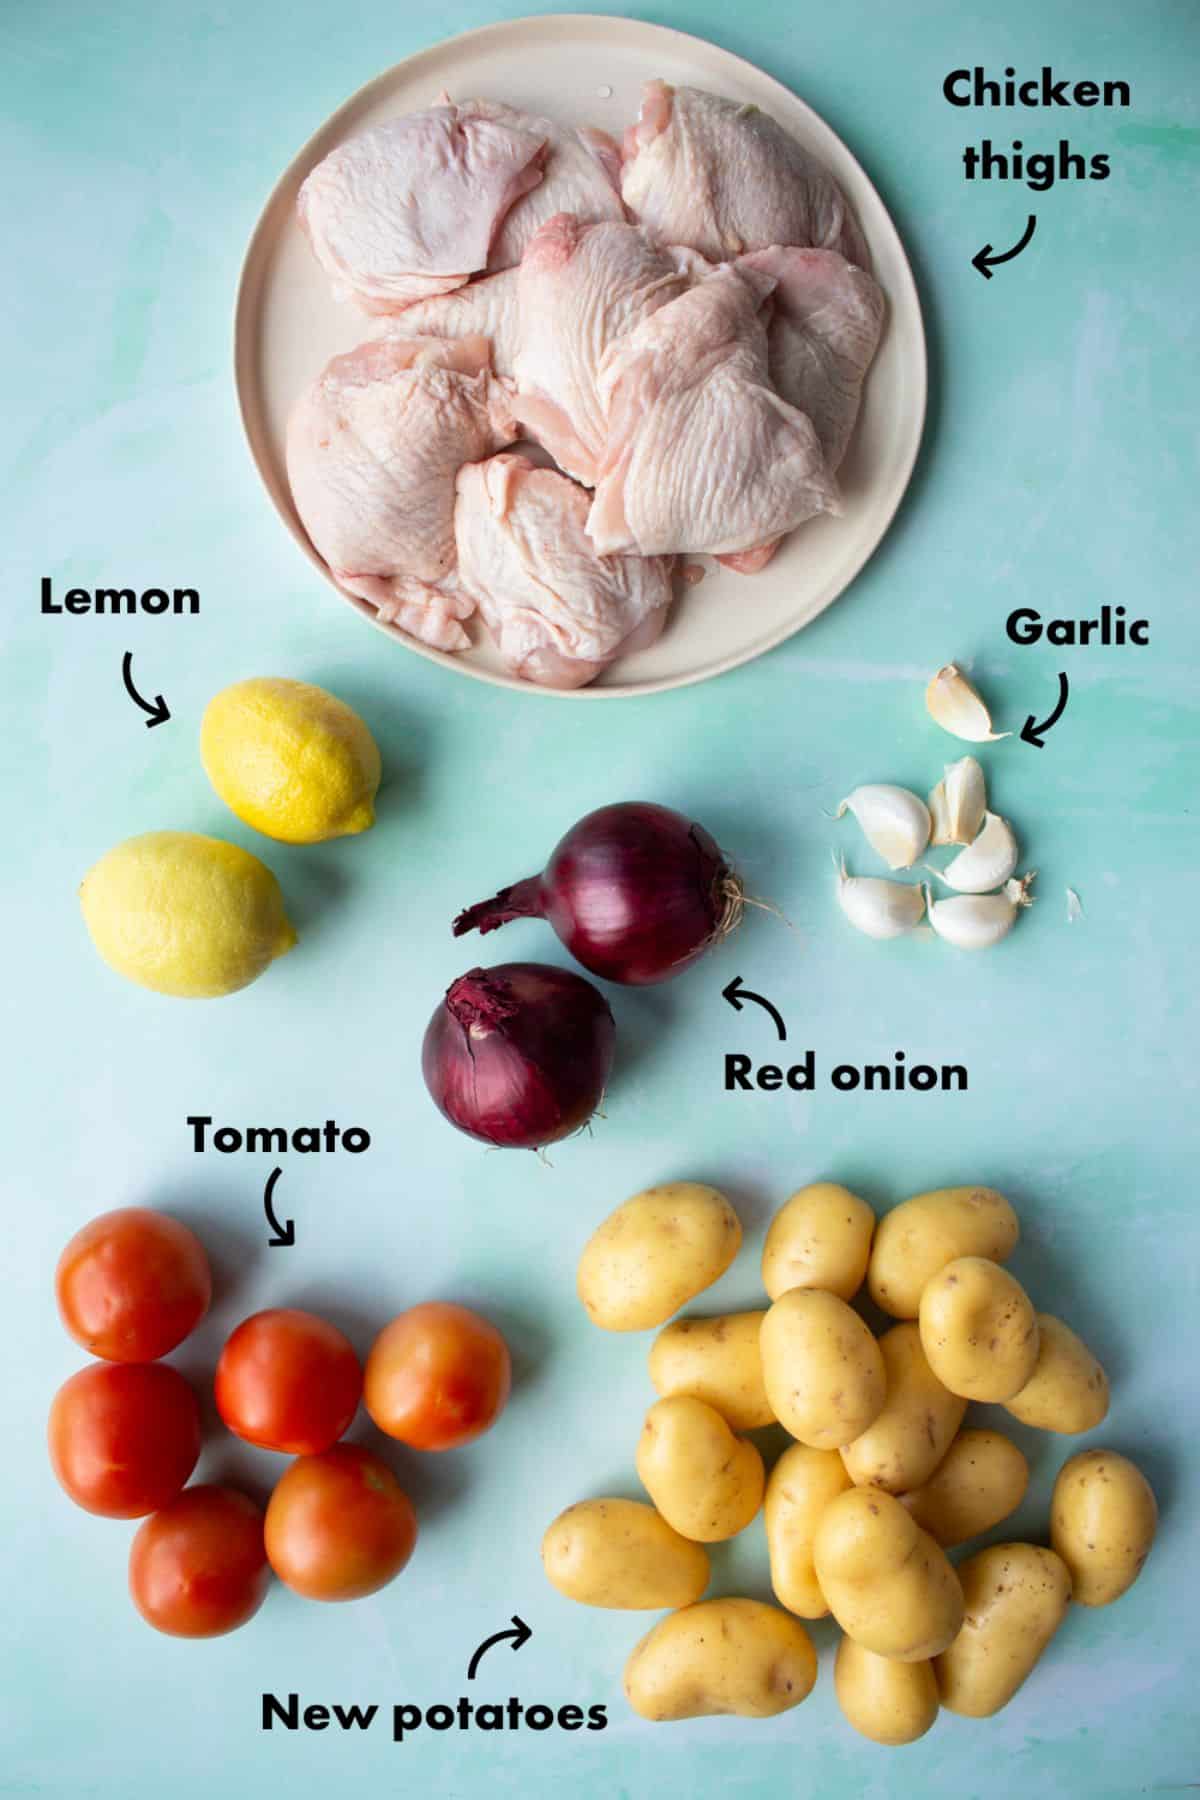 Ingredients to make the chicken thigh tray bake laid out on a pale blue background and labelled.